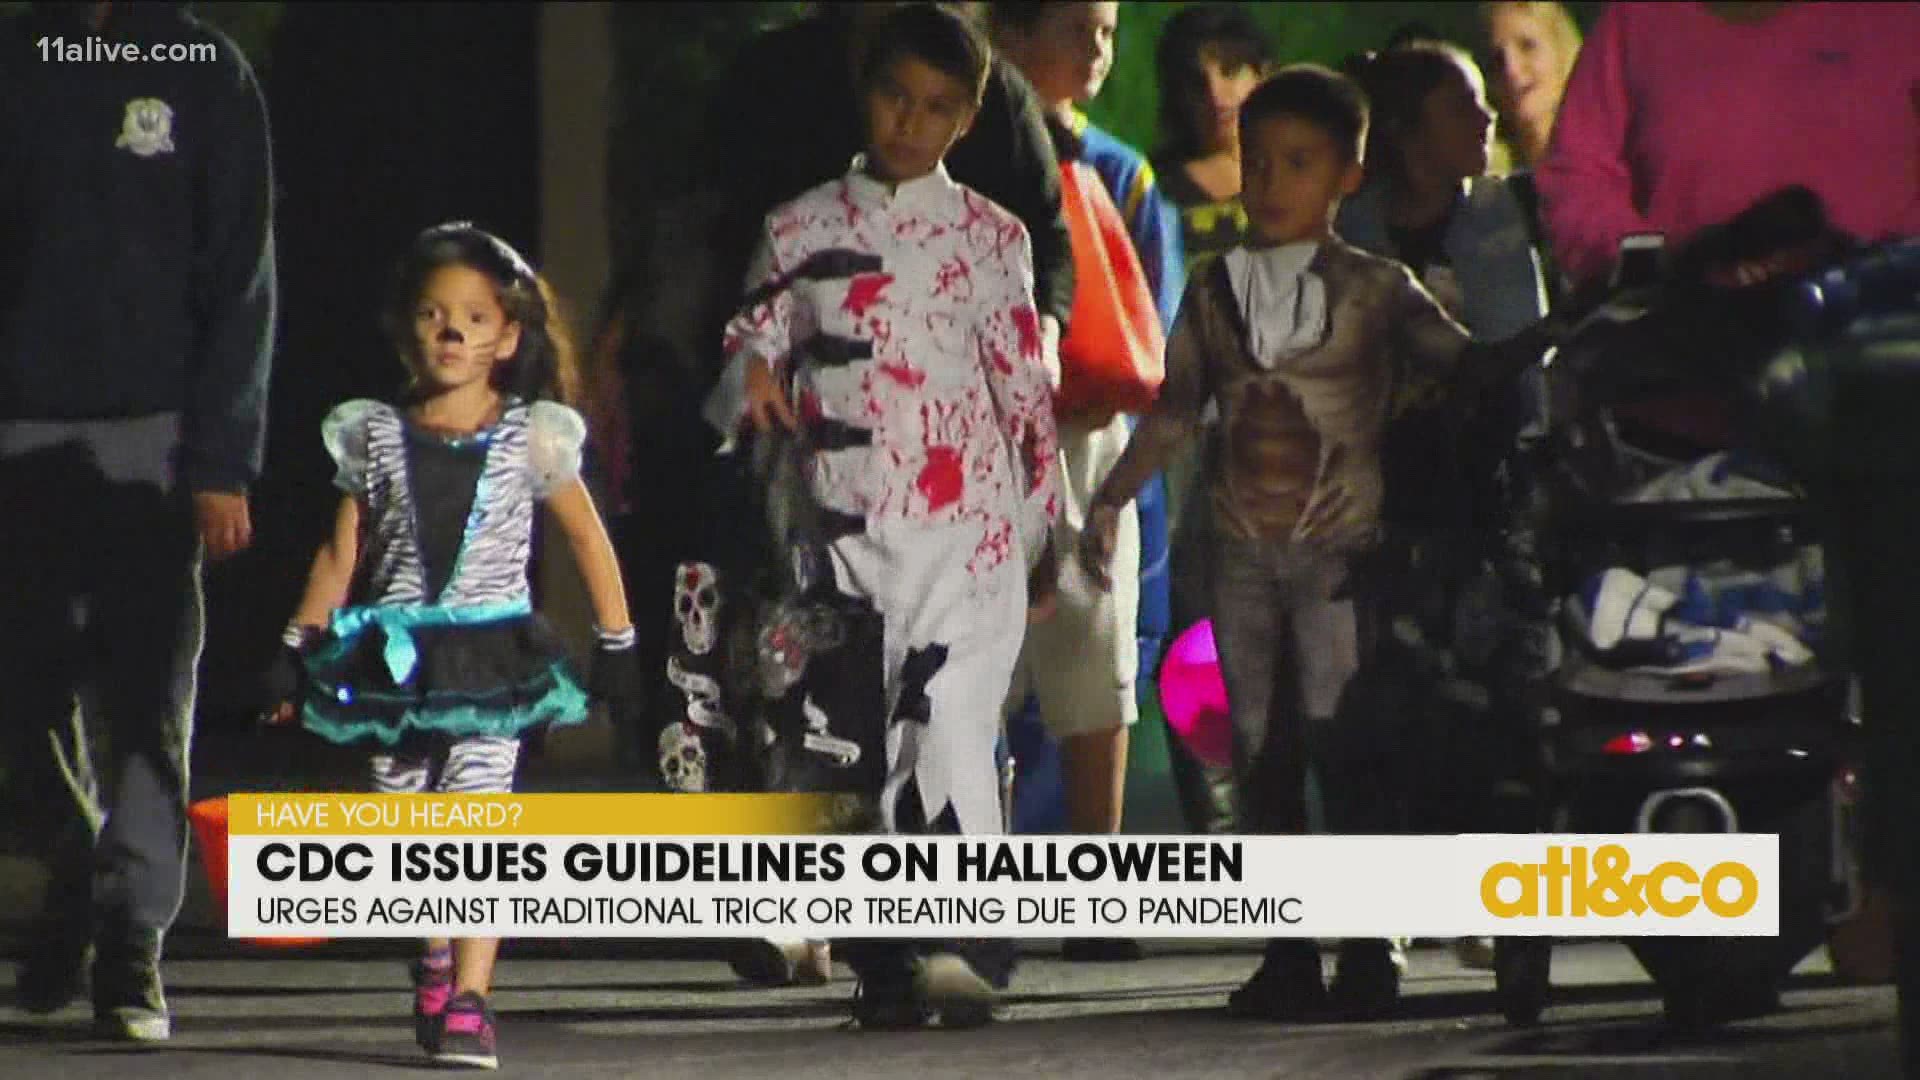 Have You Heard? The CDC urges against traditional trick-or-treating due to the pandemic. Christine and Cara chat about that and other top headlines on A&C.